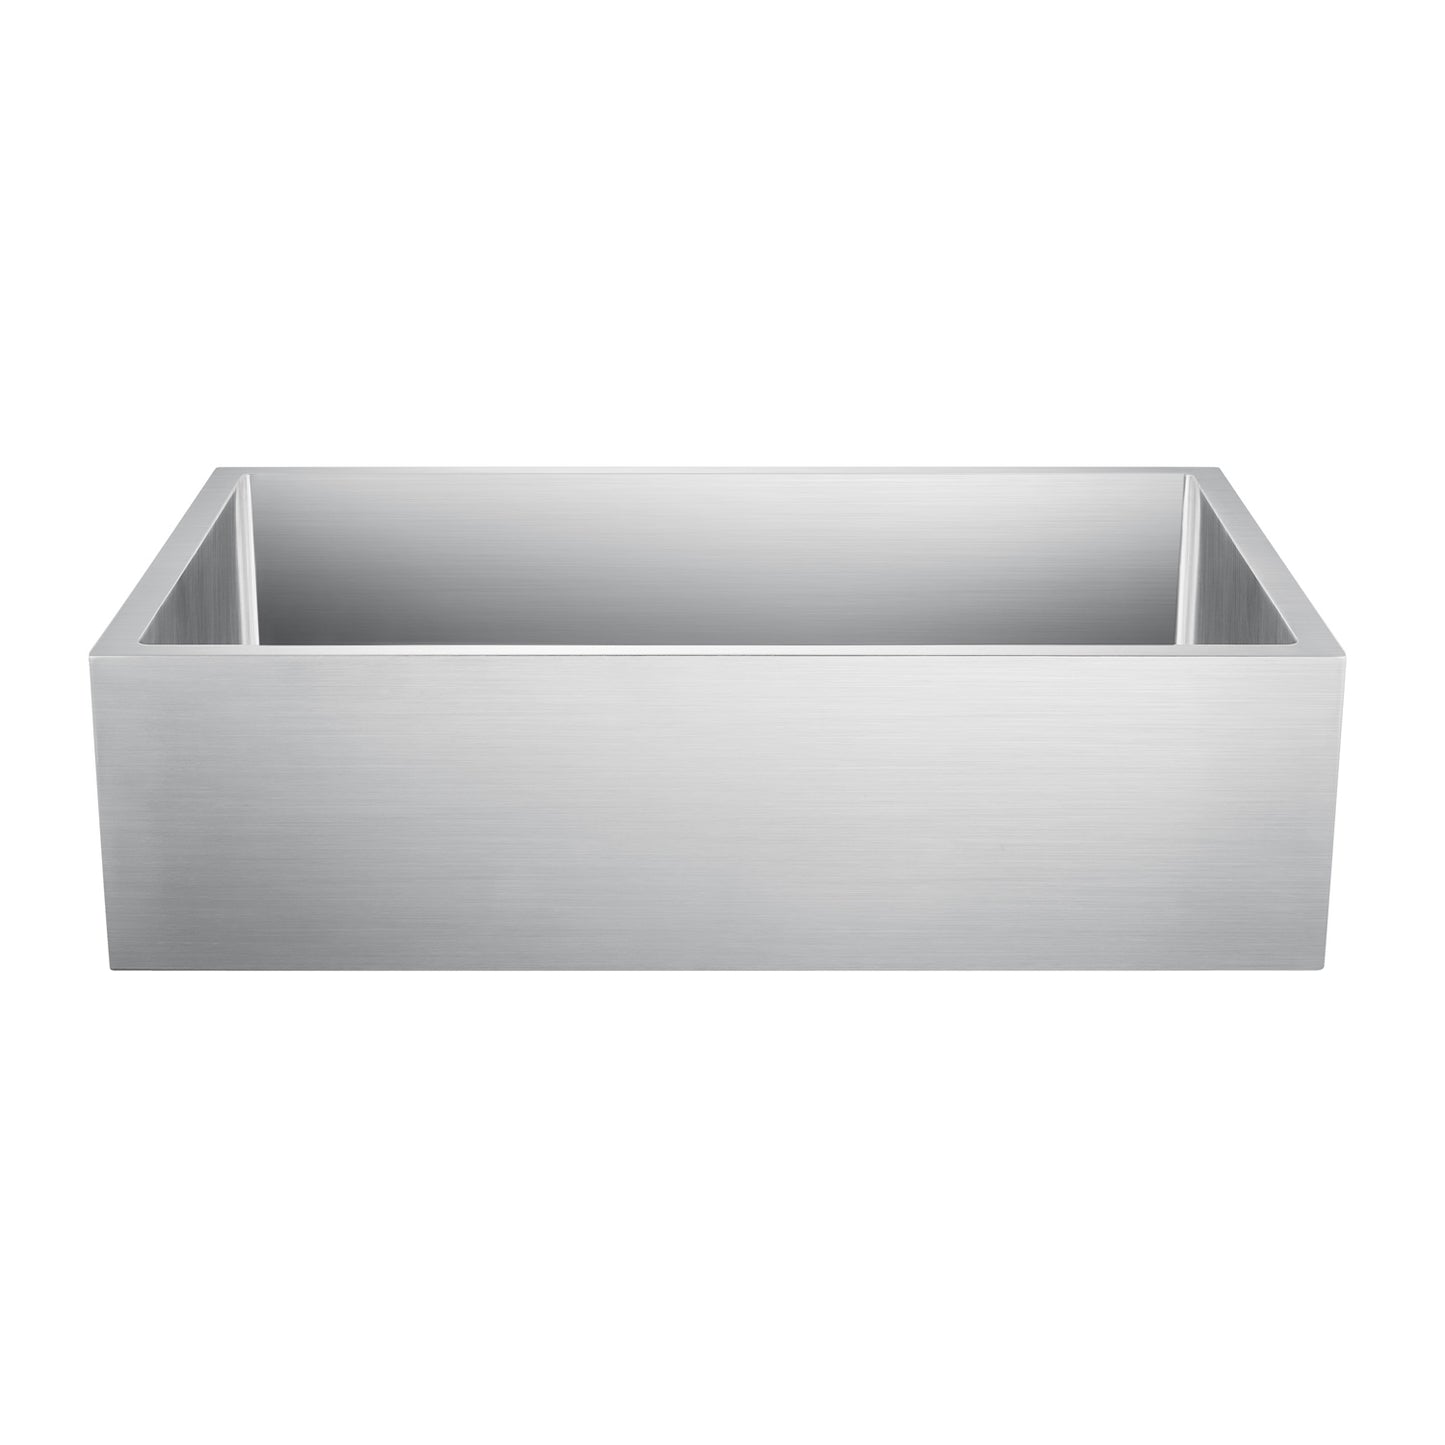 Bailey 33" Stainless Steel Single Bowl Apron Sink